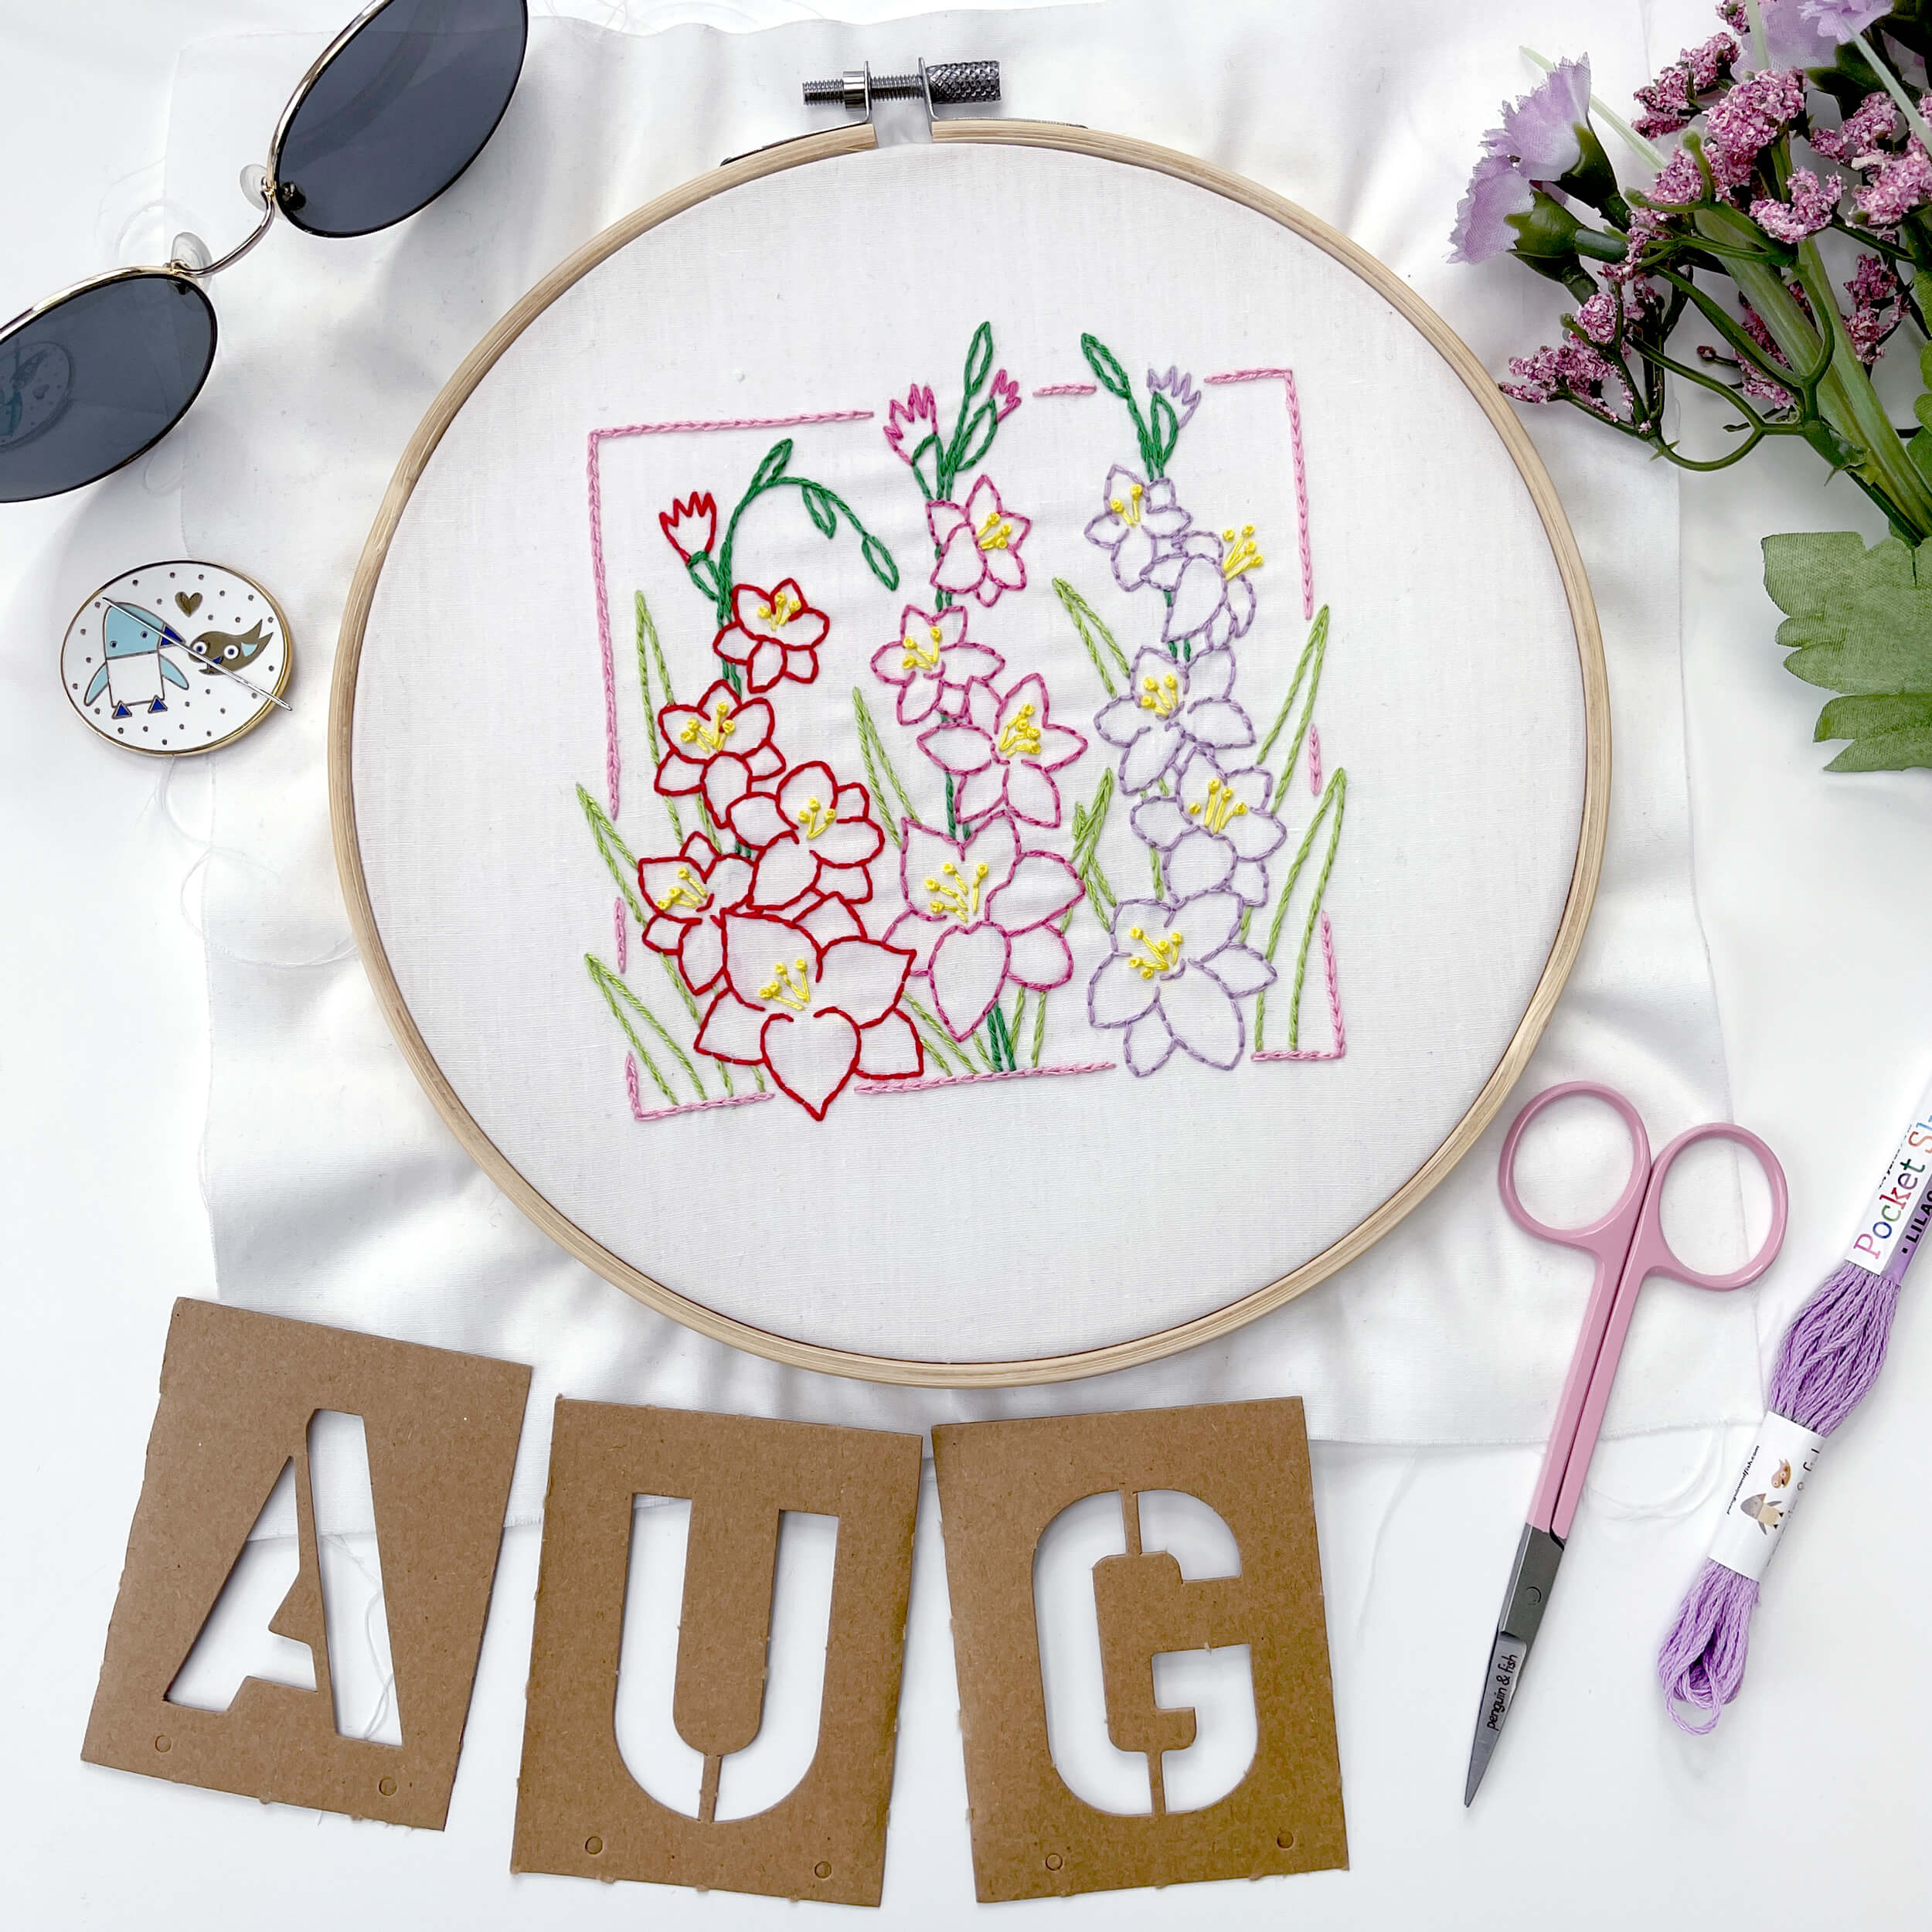 August Gladiolus embroidery pattern finished in hoop with letters AUG